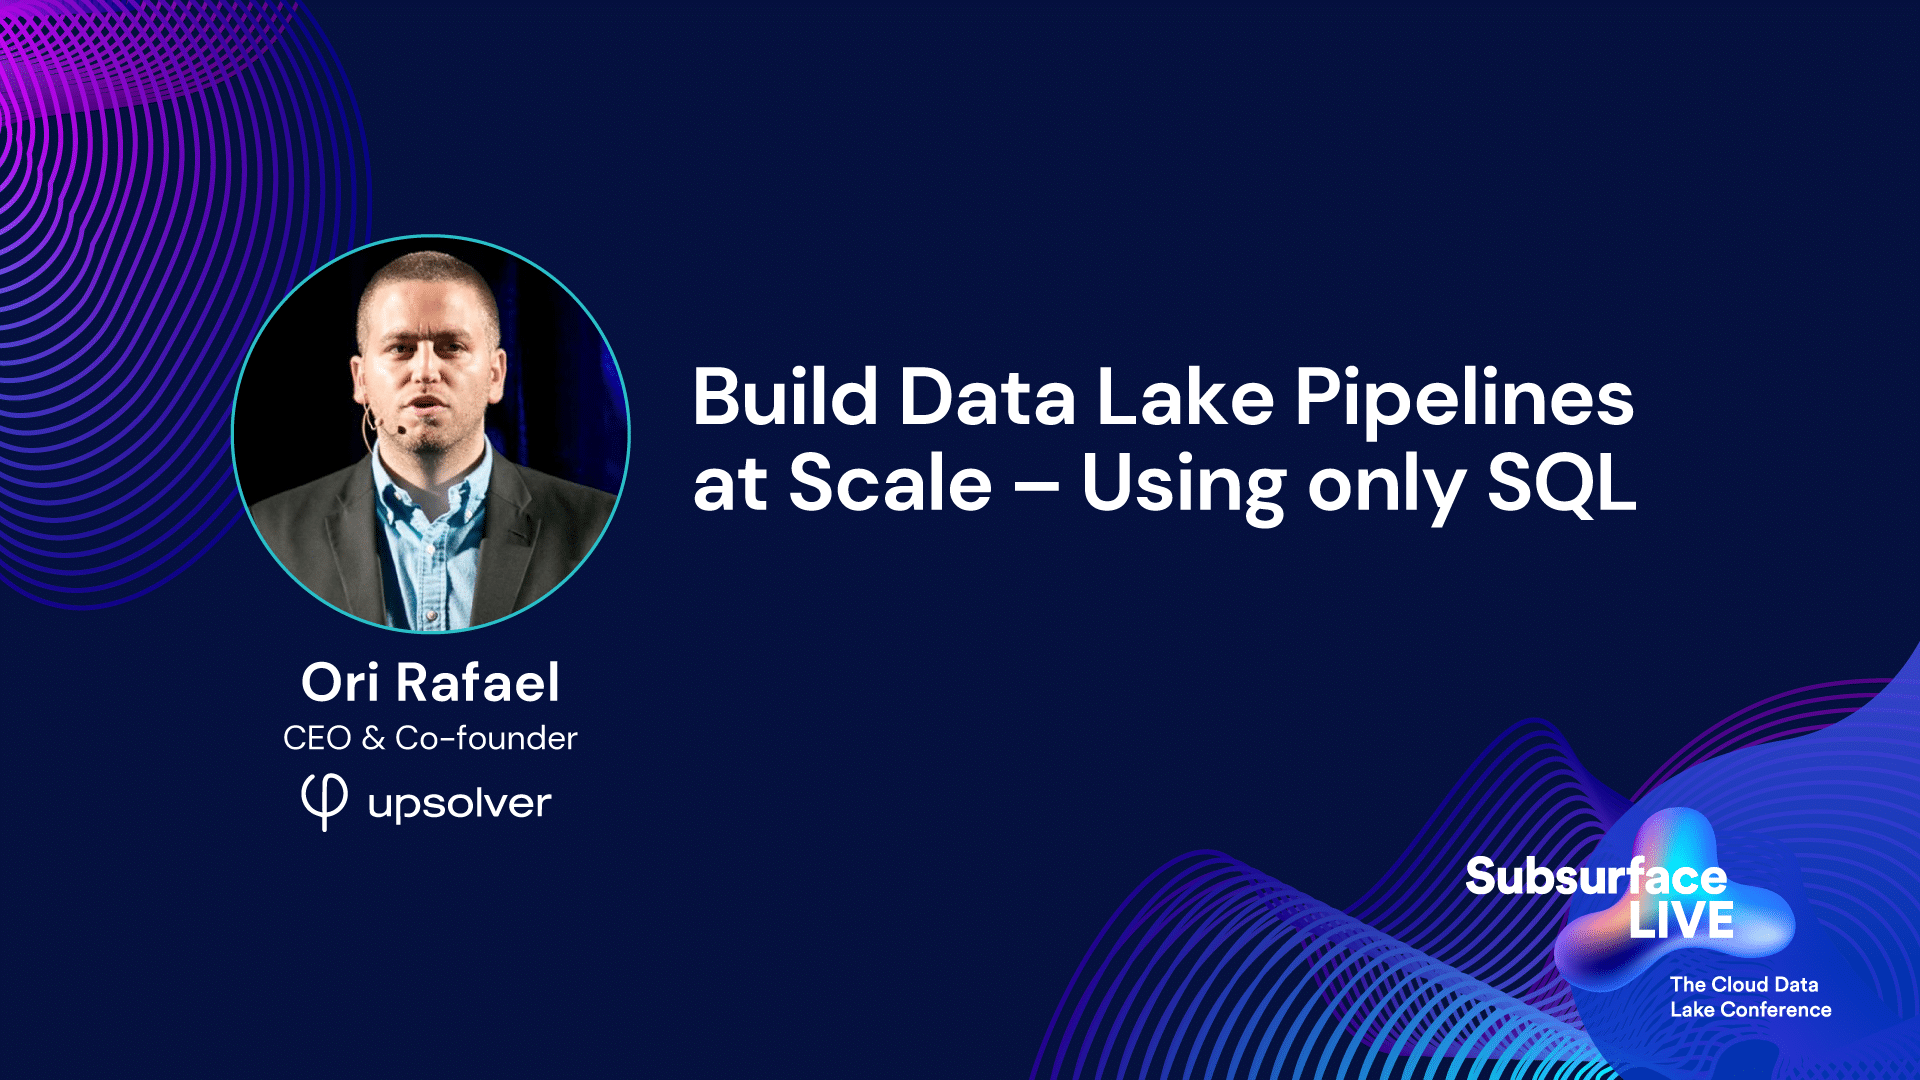 Build Data Lake Pipelines at Scale – Using only SQL